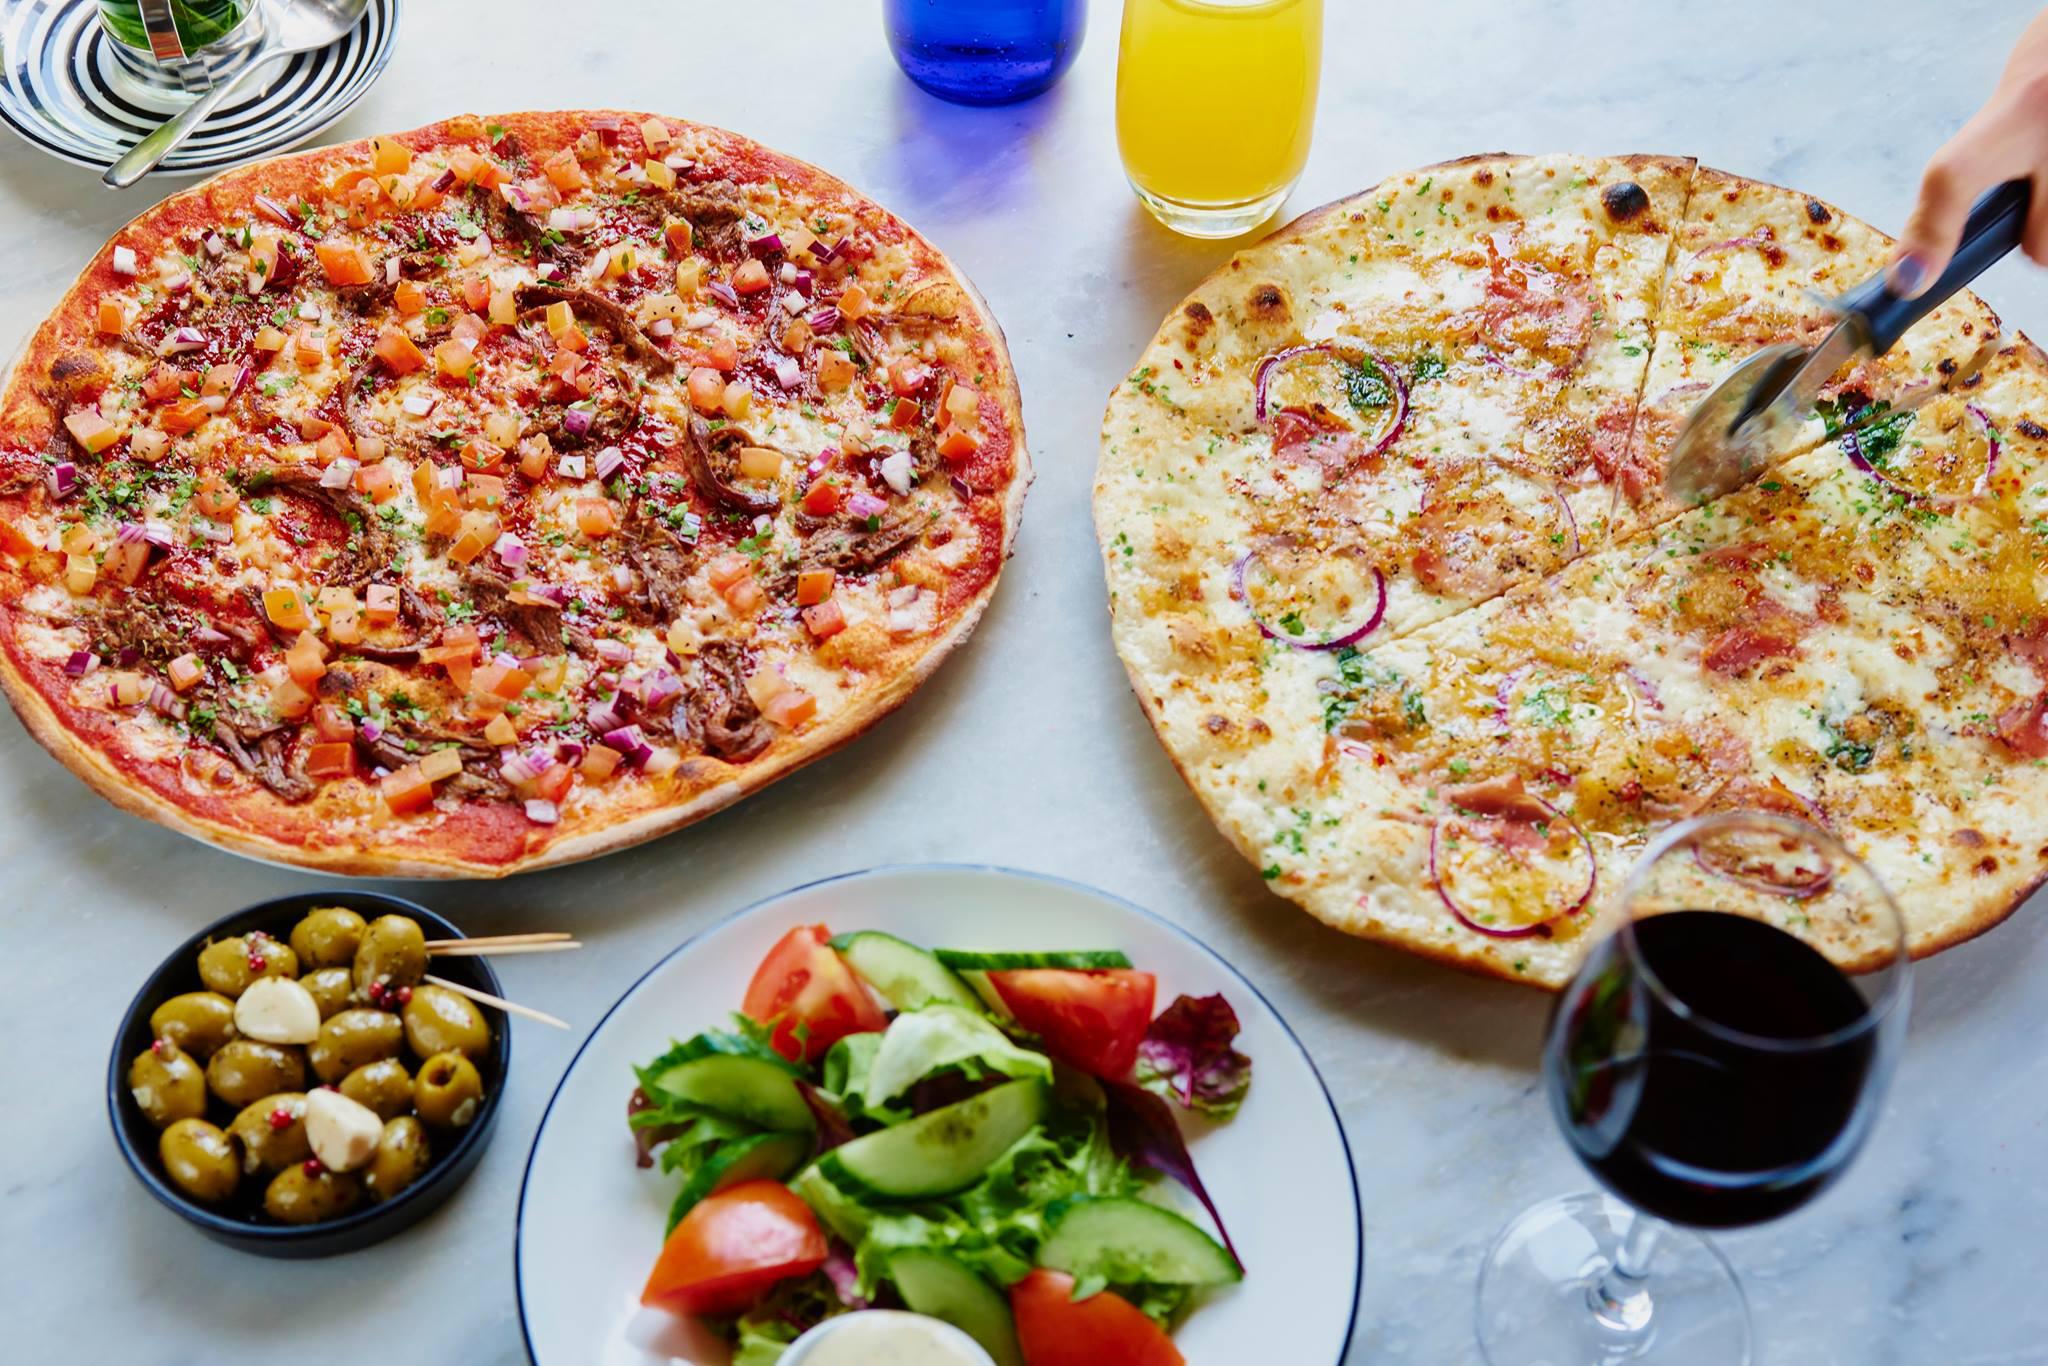 Images Pizza Express